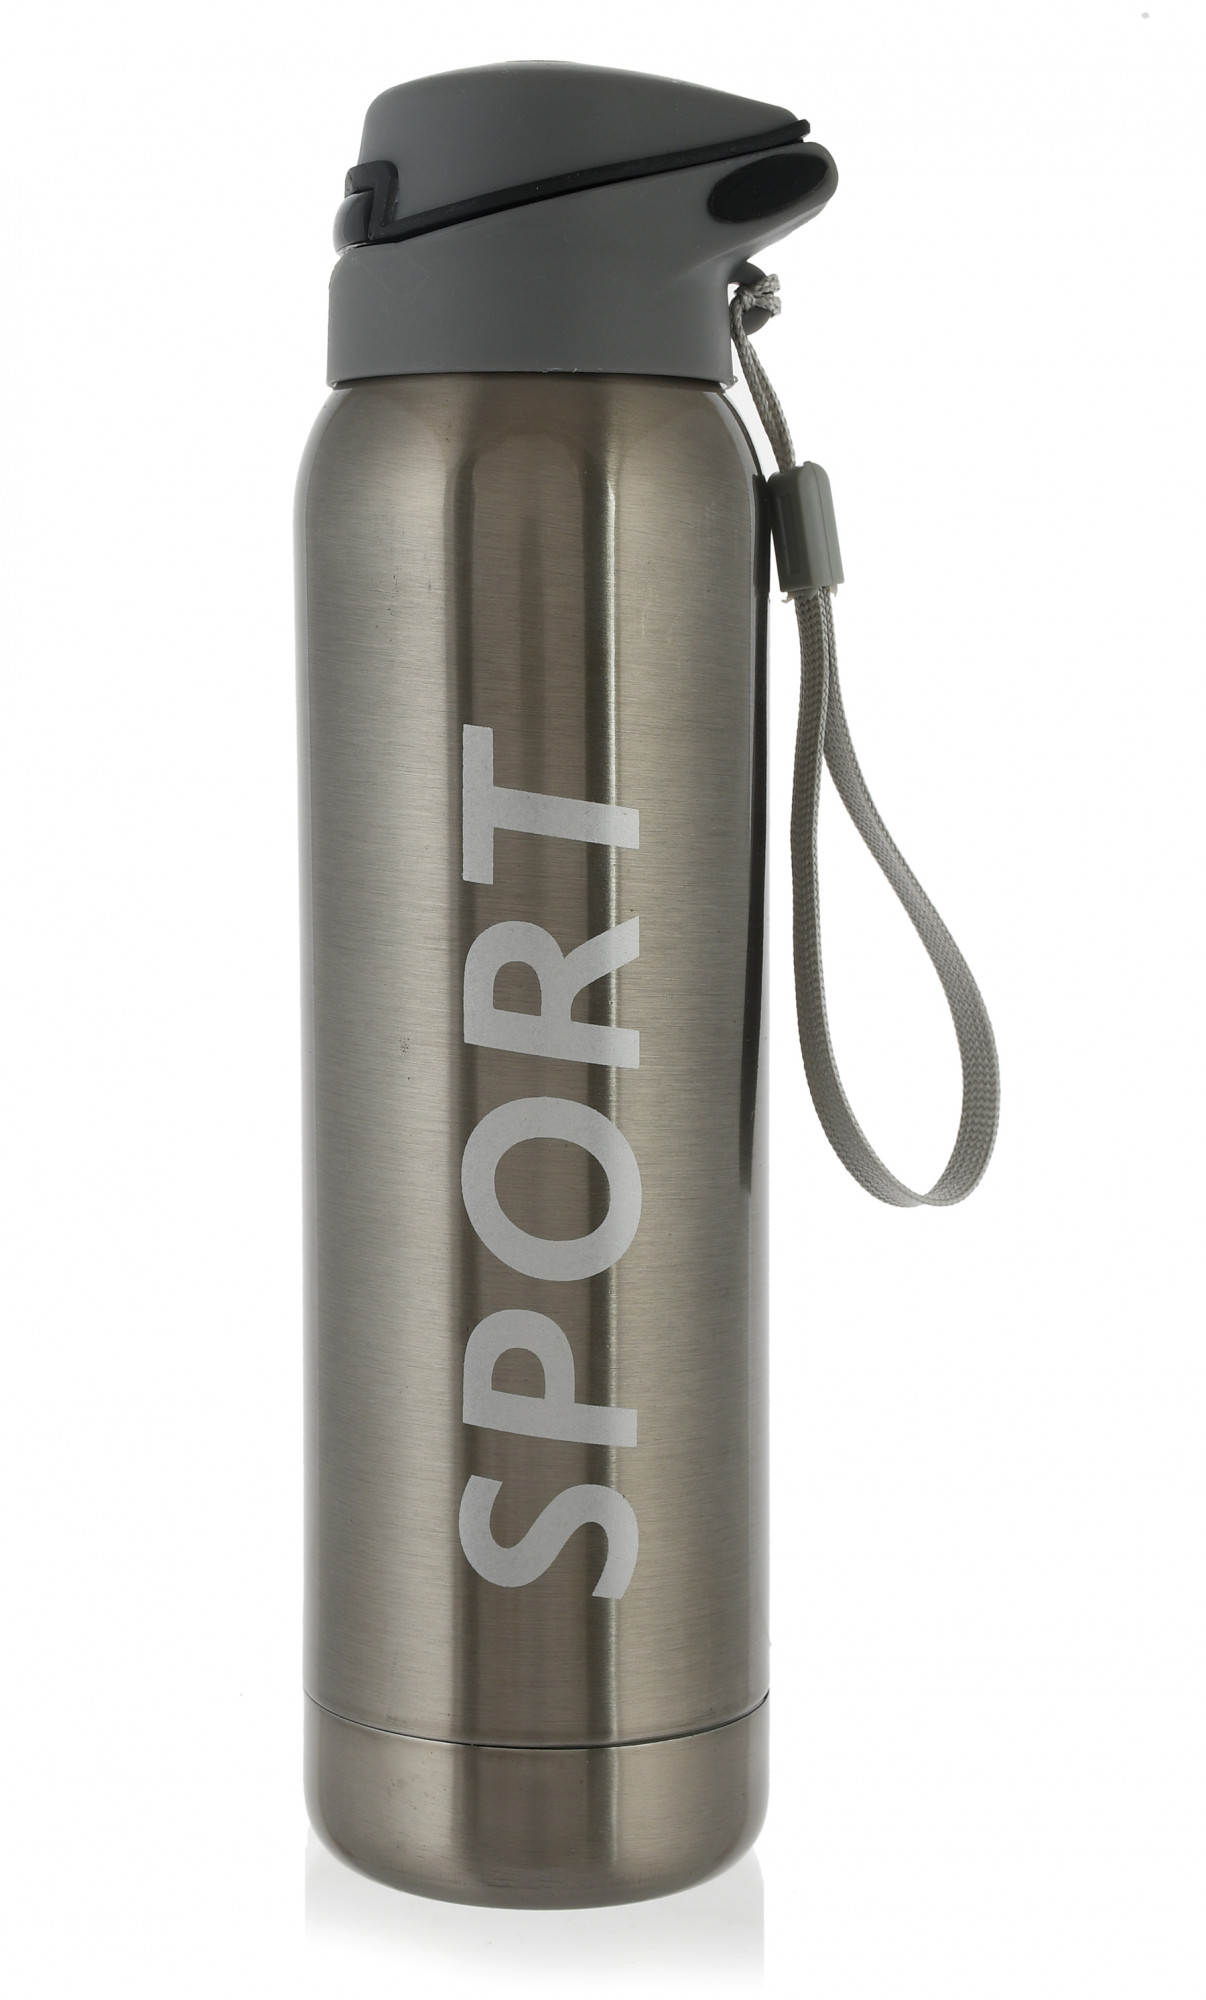 Kuber Industries Stainless Steel BPA Free Drinking Bottle, Leakproof Gym Bottle, Ideal for Sports, Bike, Running, Hiking With Sipper, 500ml (Silver)